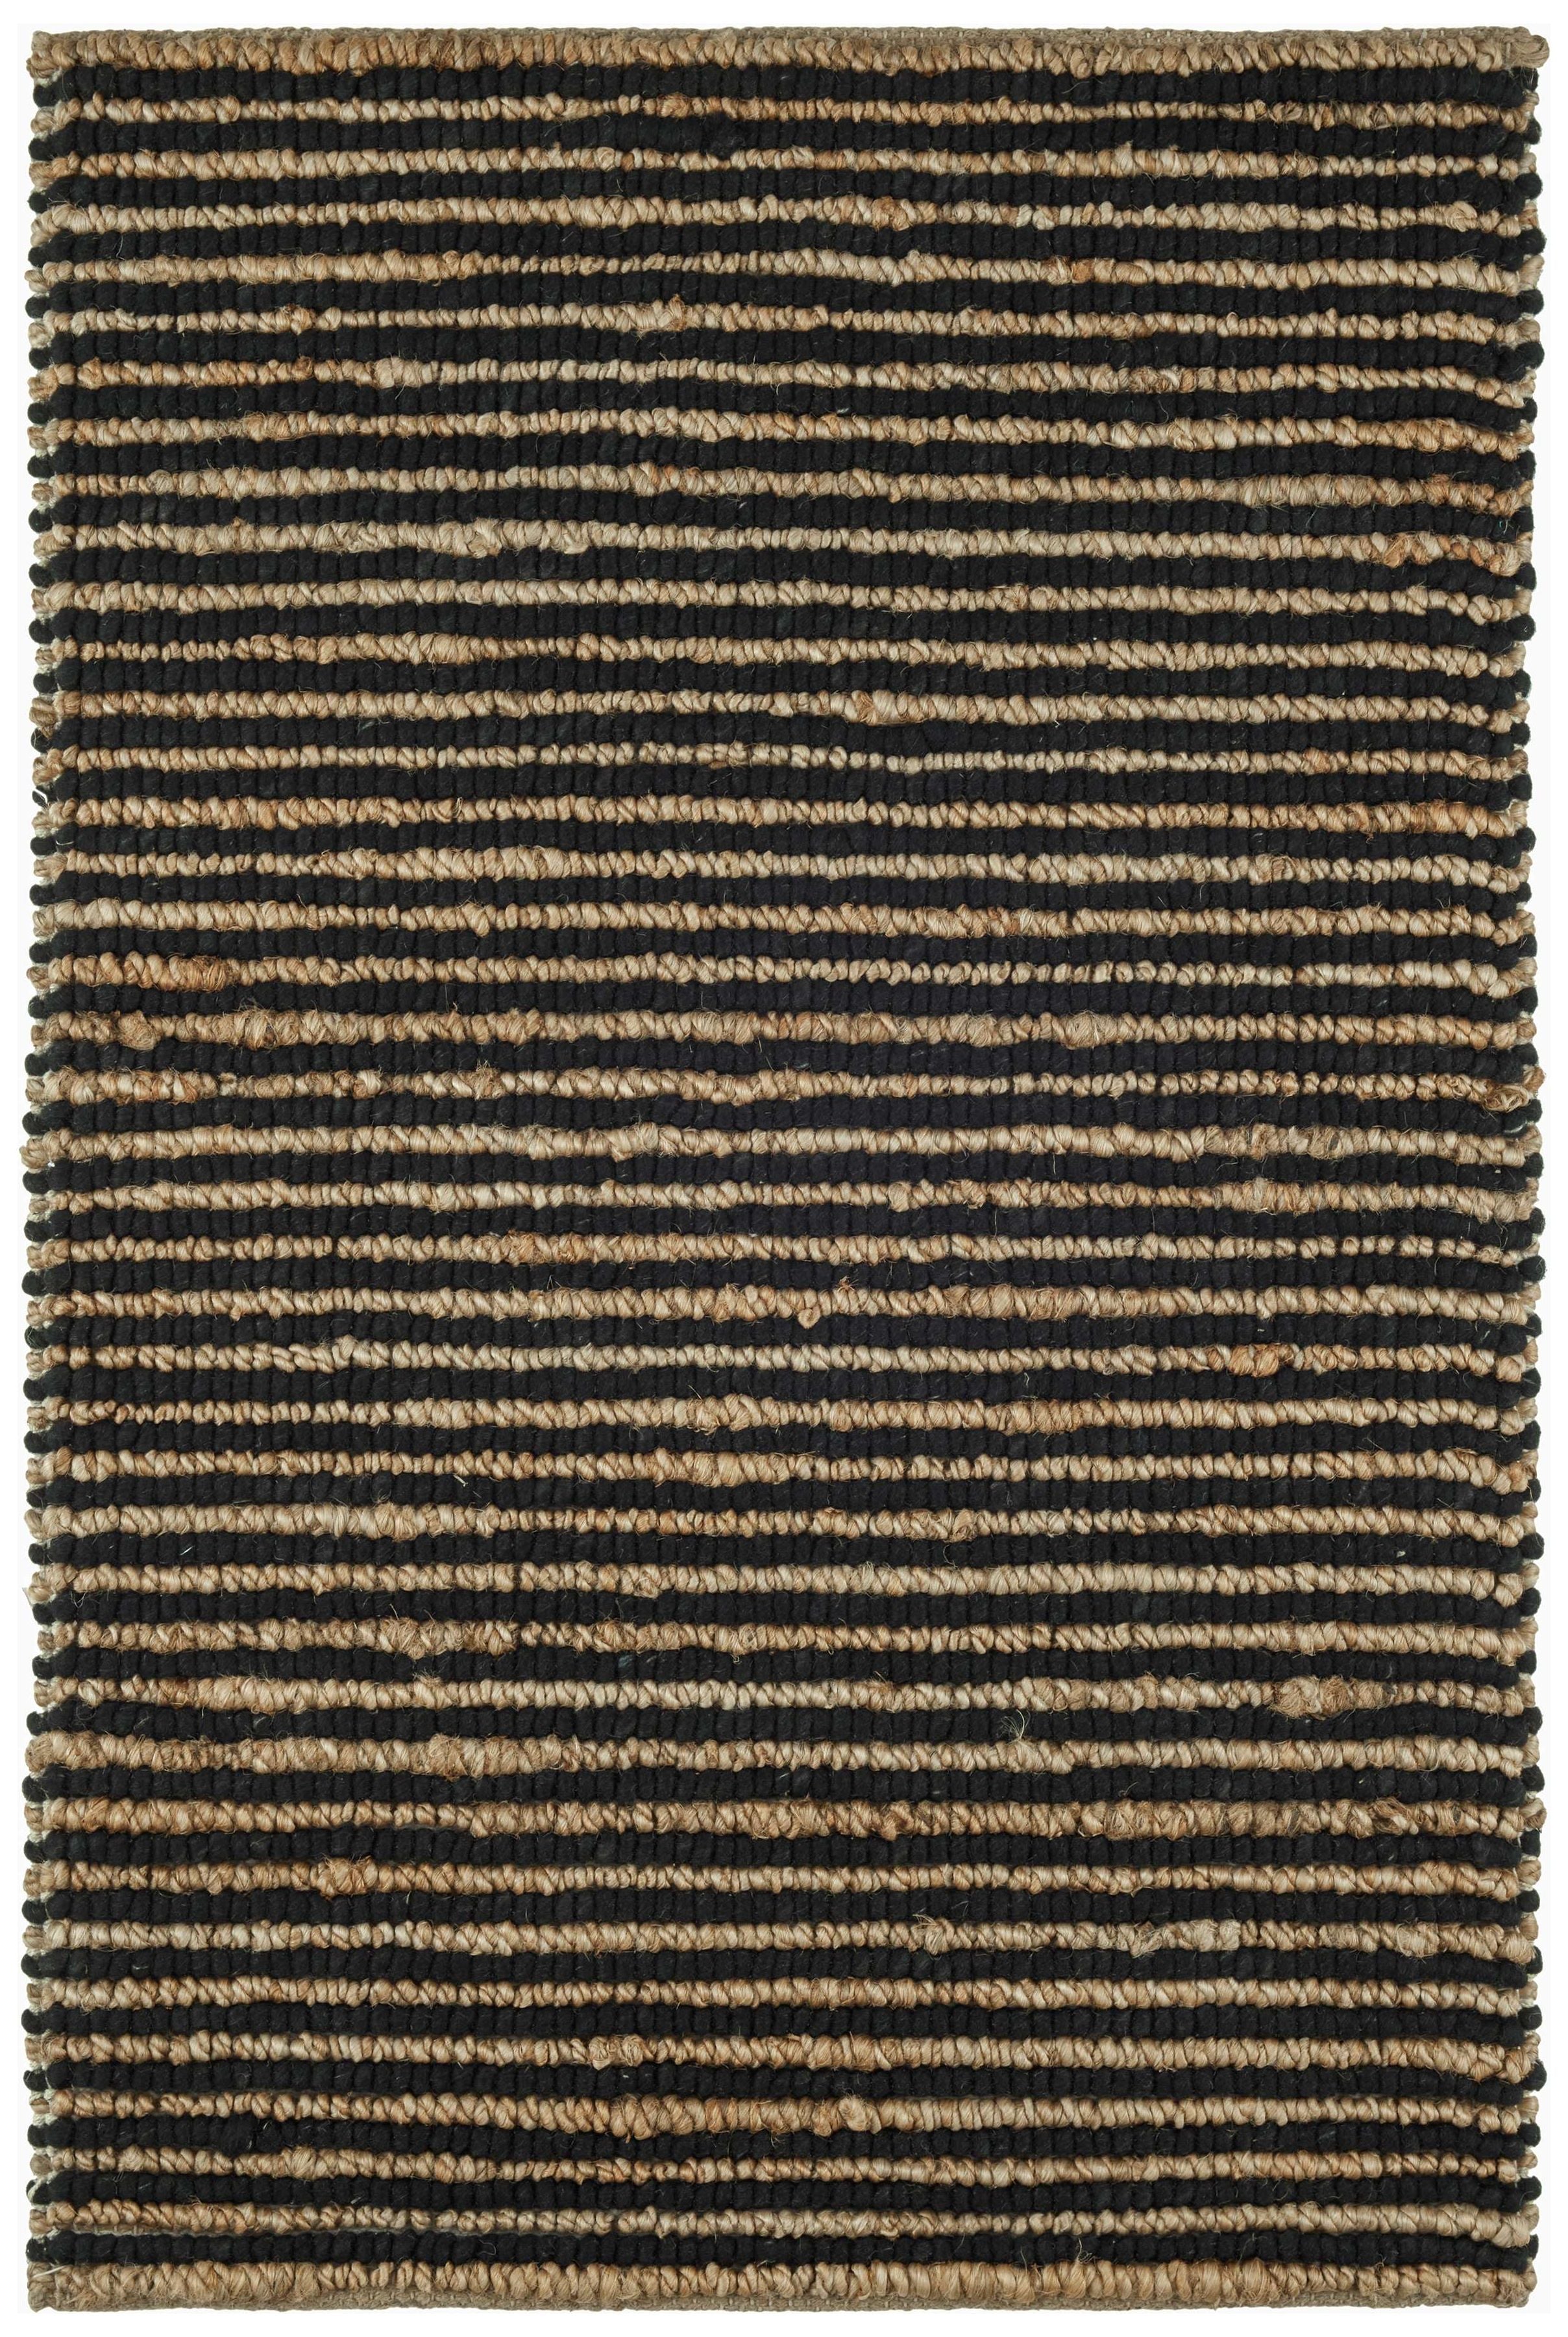 Combining a low profile surface with a dramatic nubby texture, this hardworking and durable rug features undyed Natural jute stripes combined with the warmth and comfort of Black wool. From our Bunny Williams collection. Amethyst Home provides interior design, new construction, custom furniture, and area rugs in the Portland metro area.